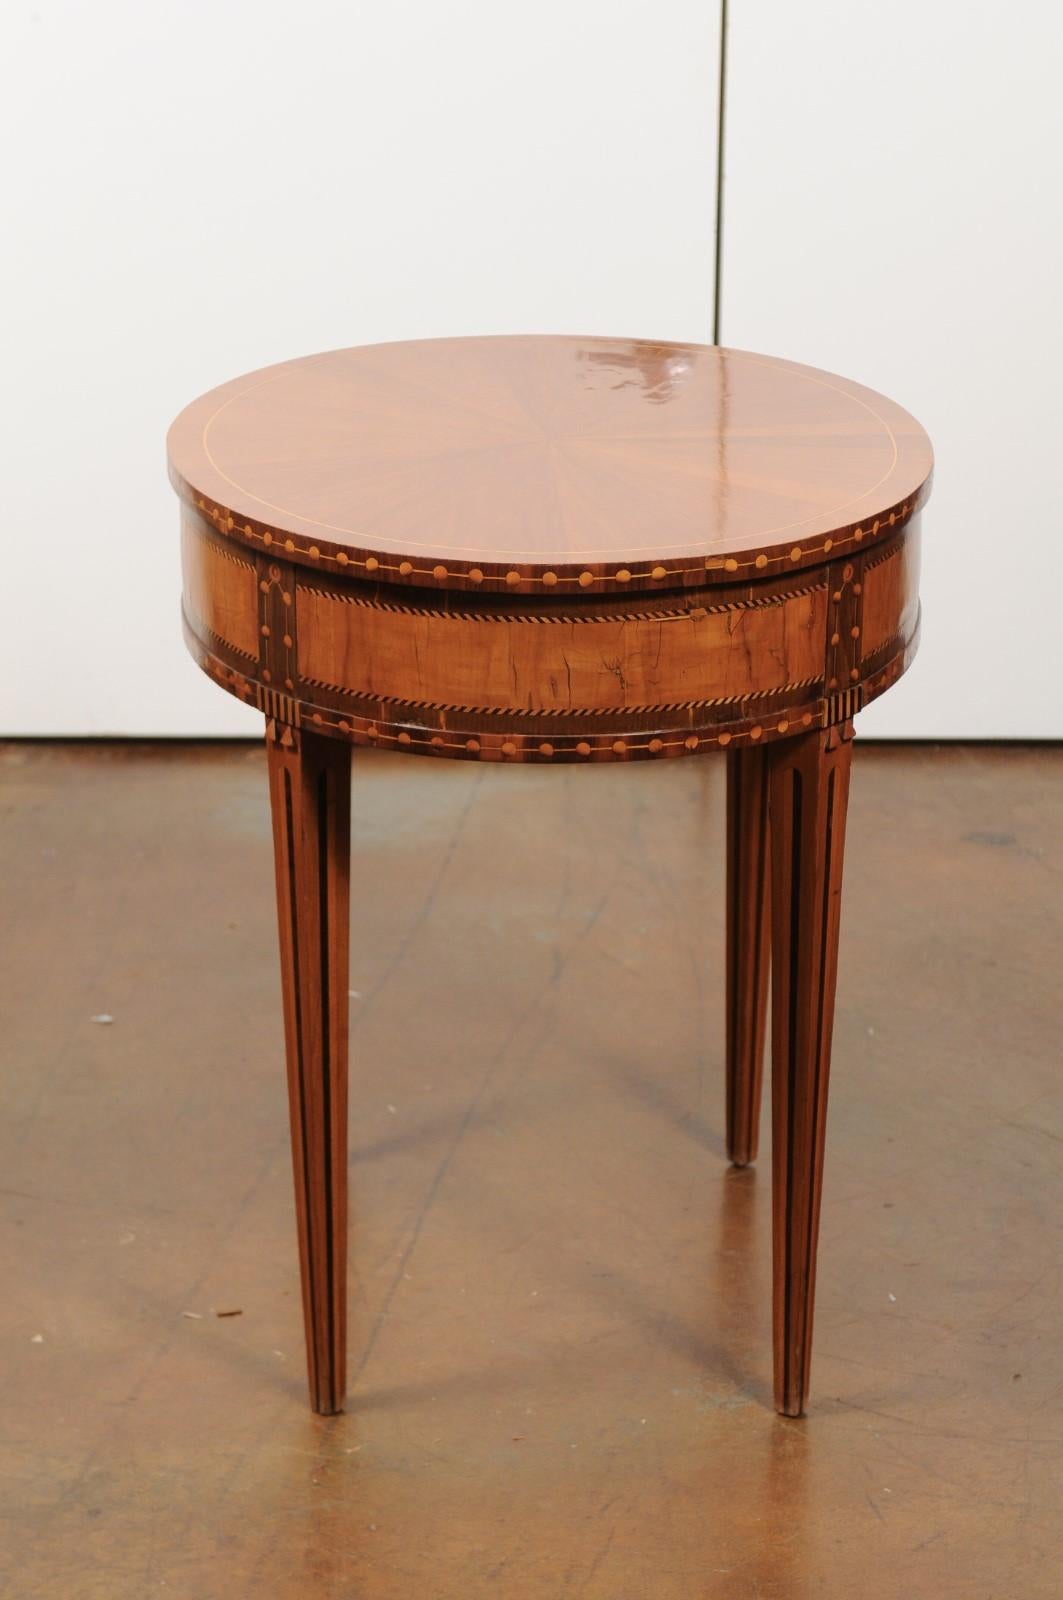 French 19th Century Oval Walnut and Satinwood Inlaid Table with Radiating Veneer (Seidenholz)